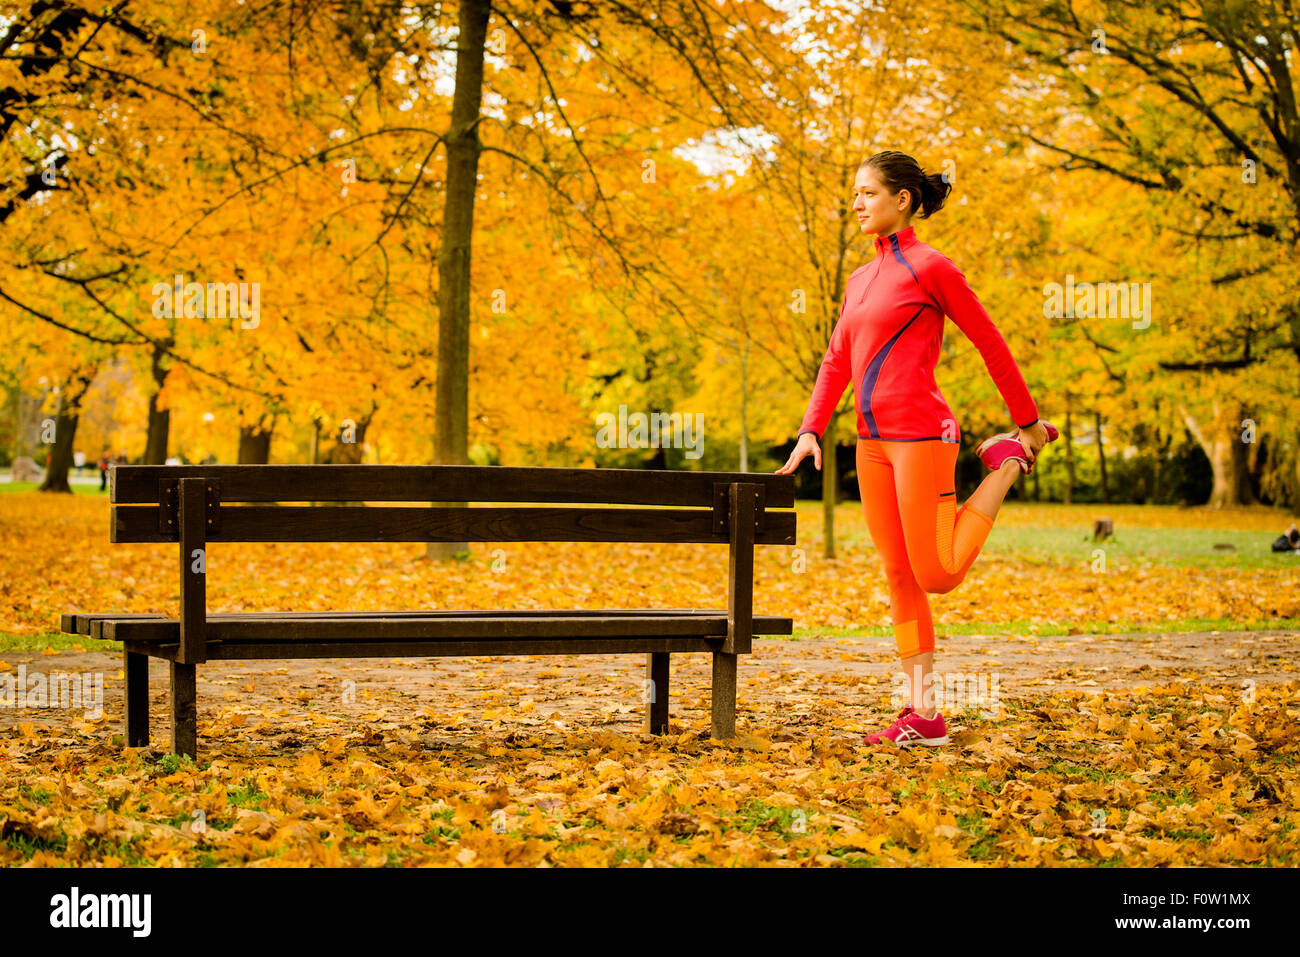 Young woman warming up at bench before jogging in autumn nature Stock Photo